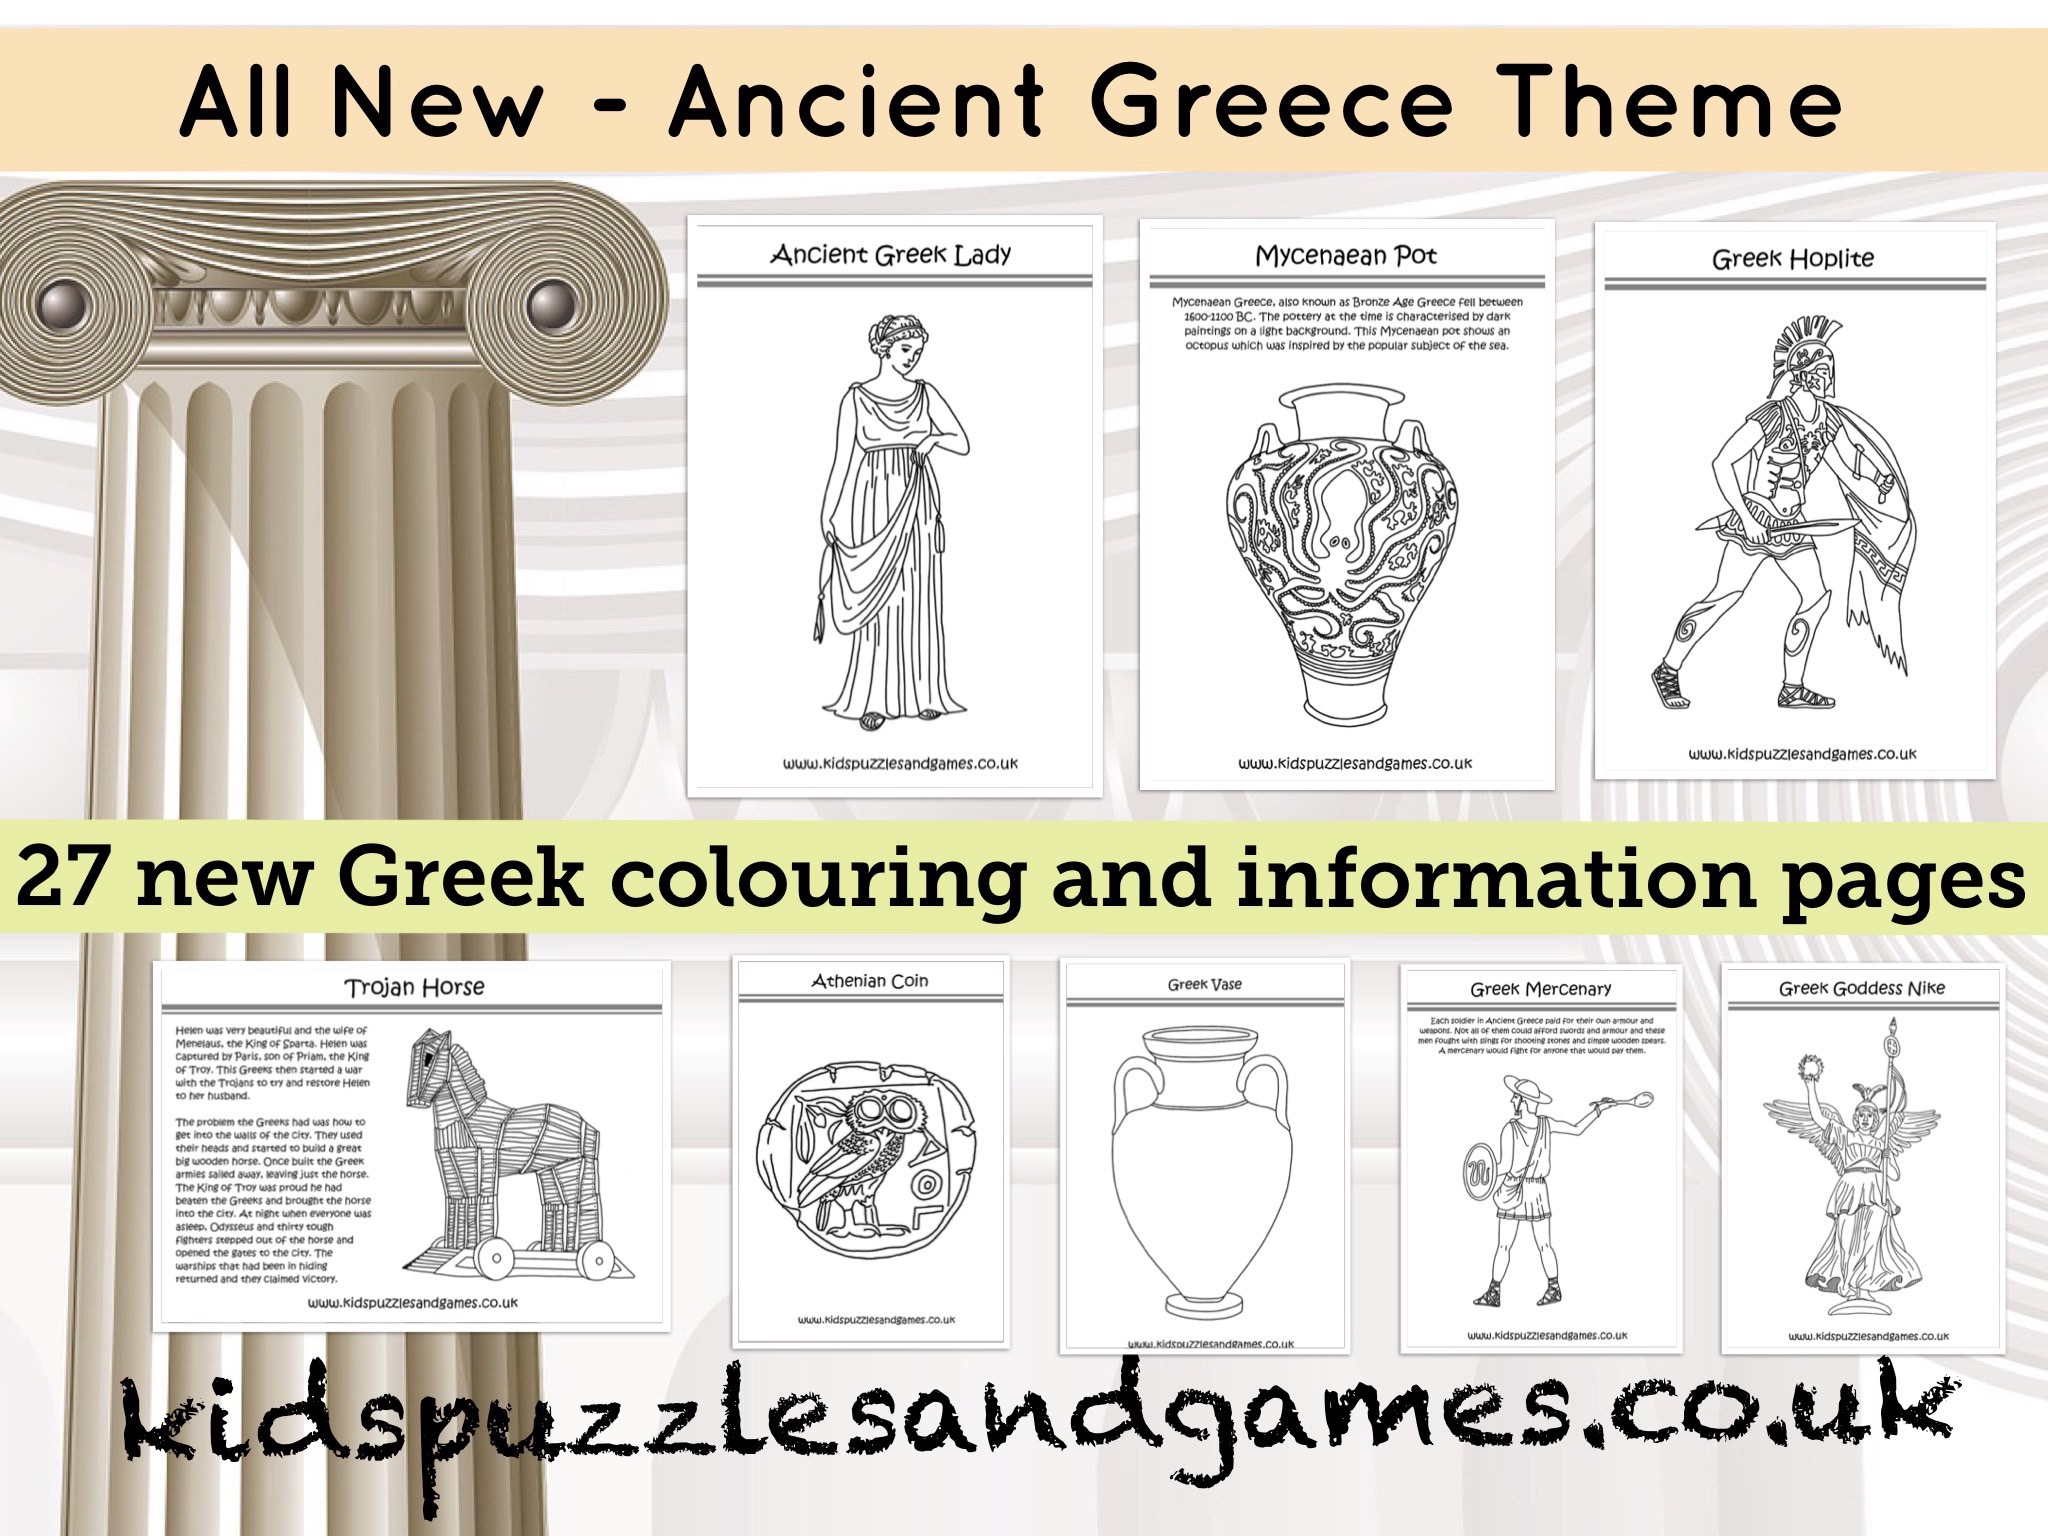 All New Ancient Greece Theme